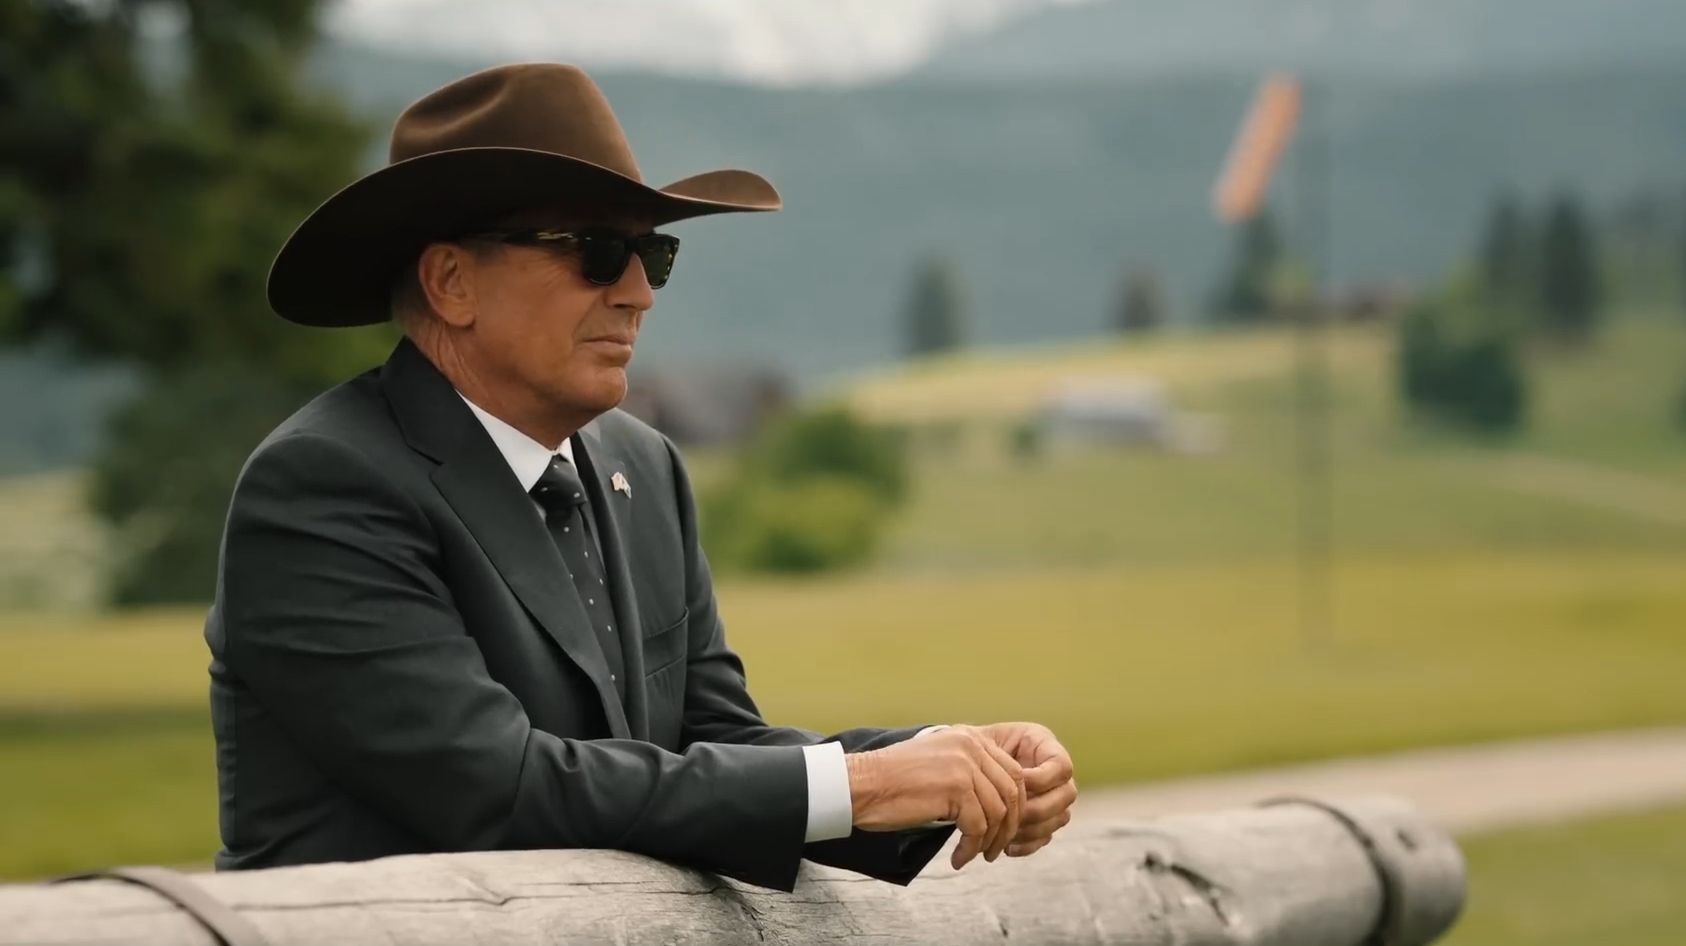 Yellowstone Season 5 Return Date Revealed: When Final Episodes Will Air